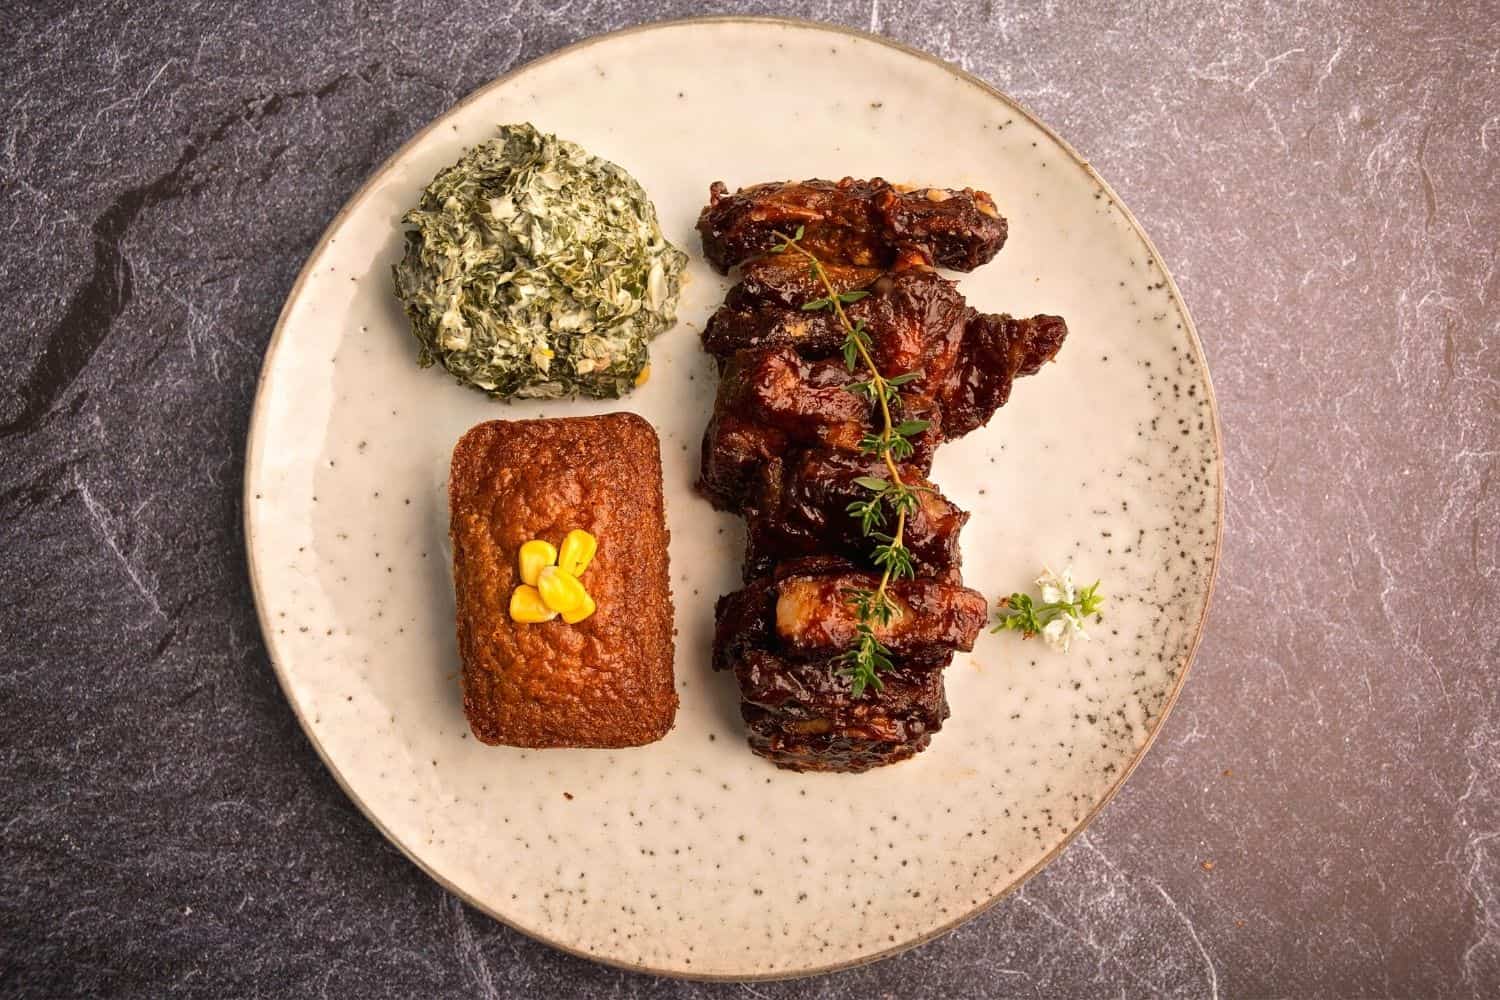 Slow braised beef short rib, homemade BBQ sauce, corn bread and creamed spinach